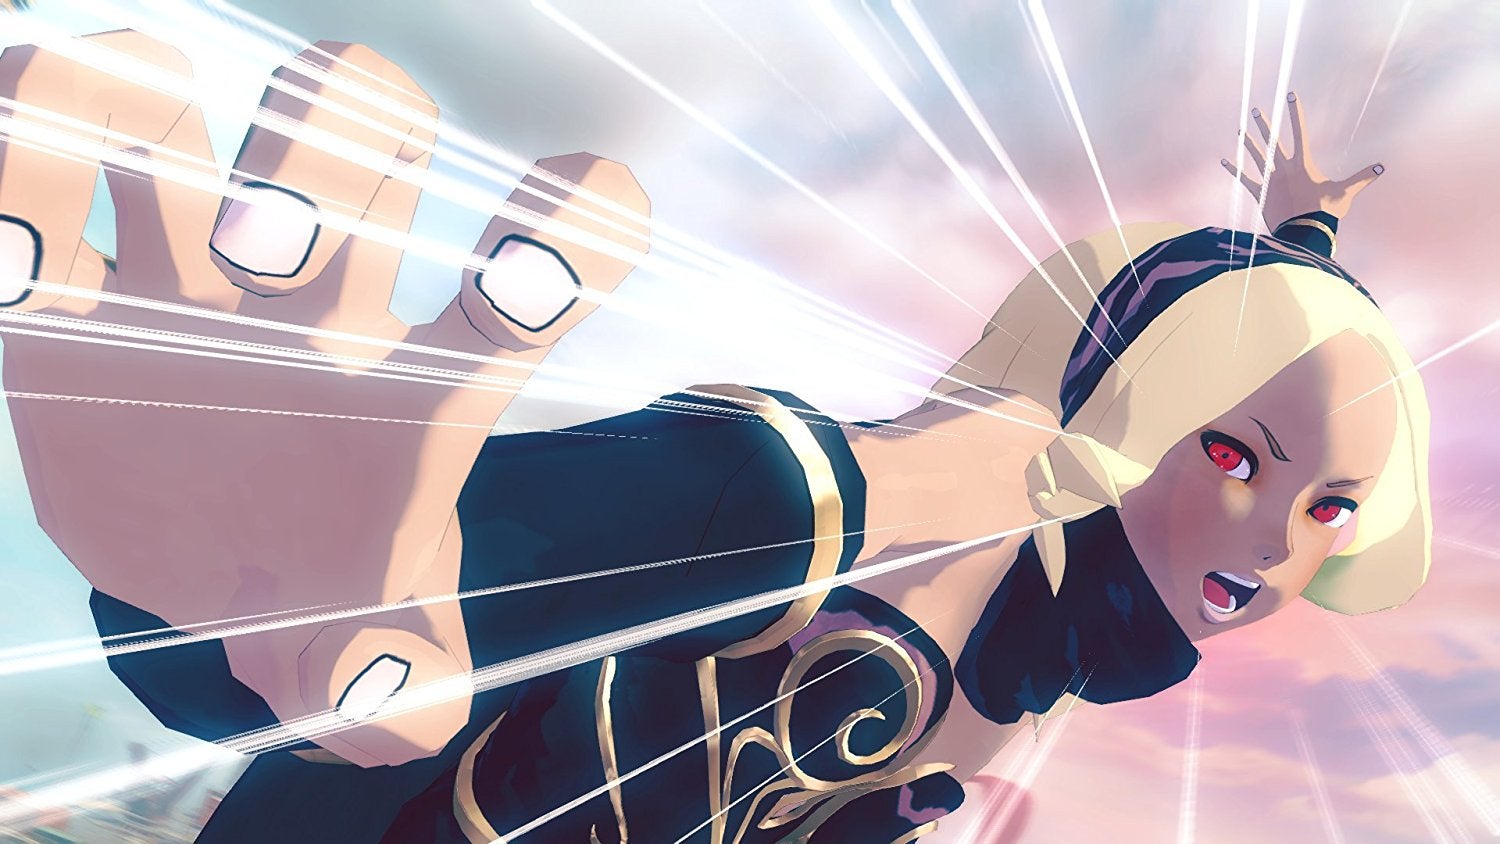 Image for Gravity Rush 2 PS4 Review: Cat's Whiskers